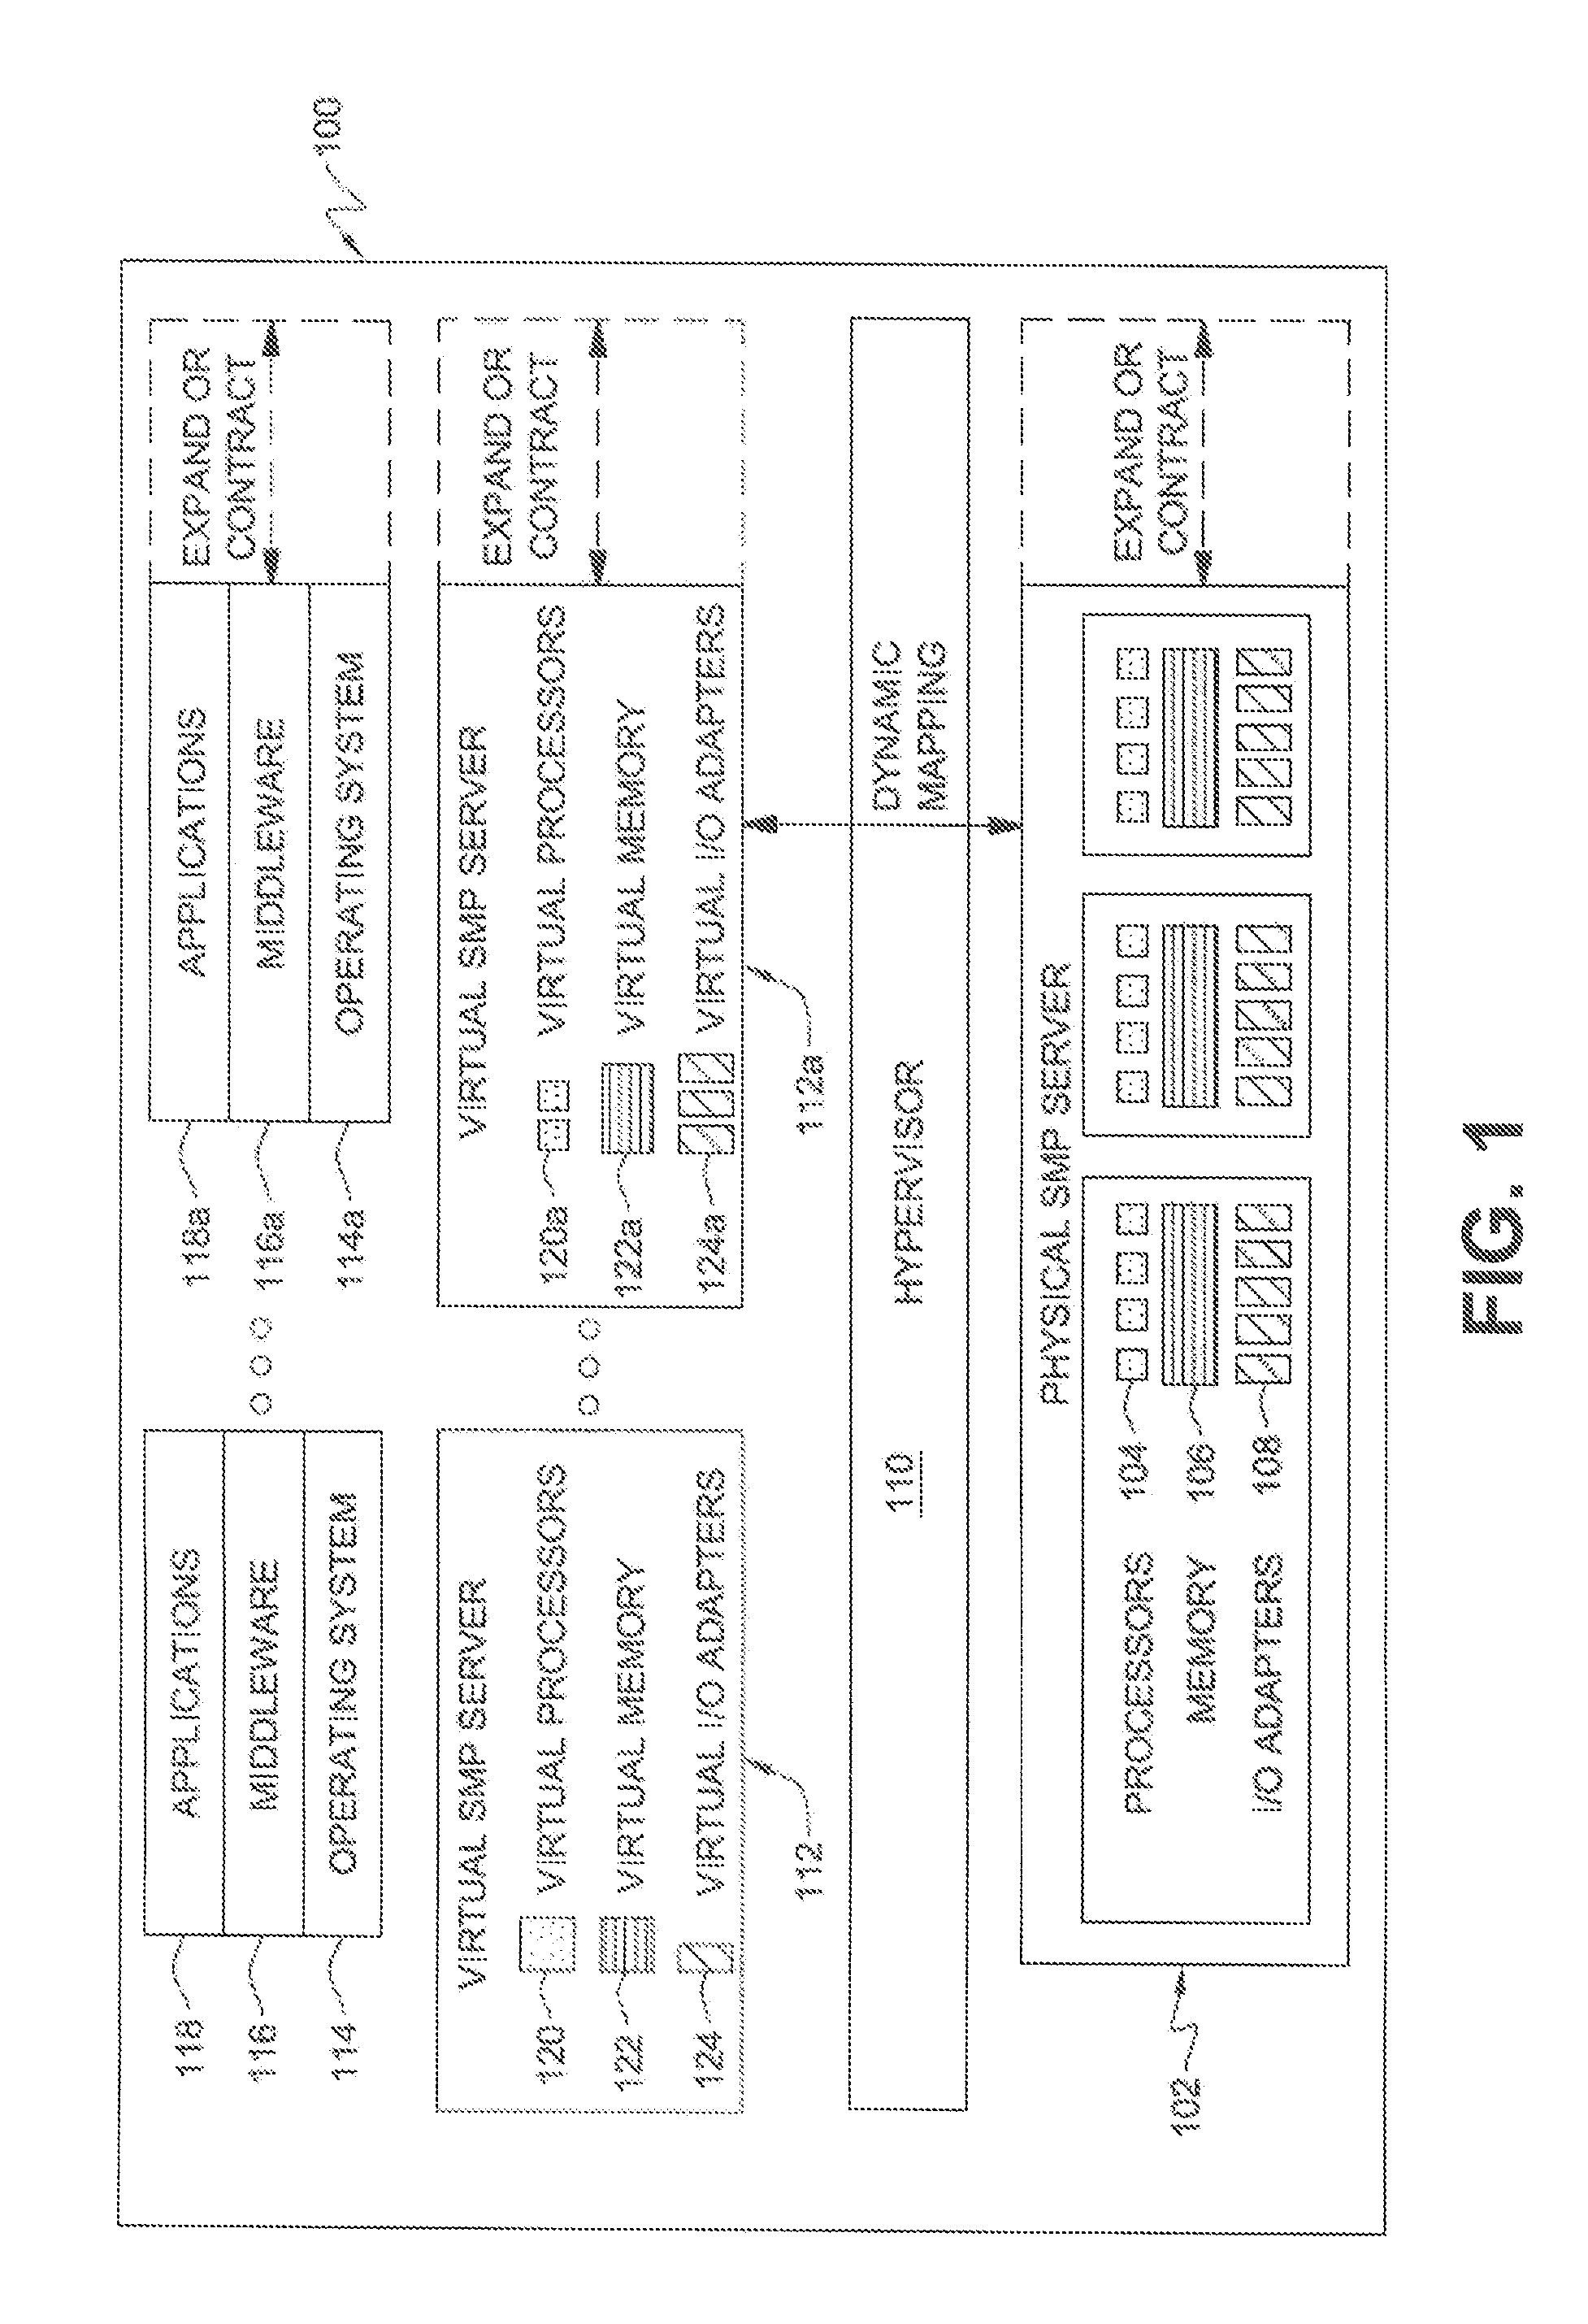 Enhanced error handling for self-virtualizing input/output device in logically-partitioned data processing system